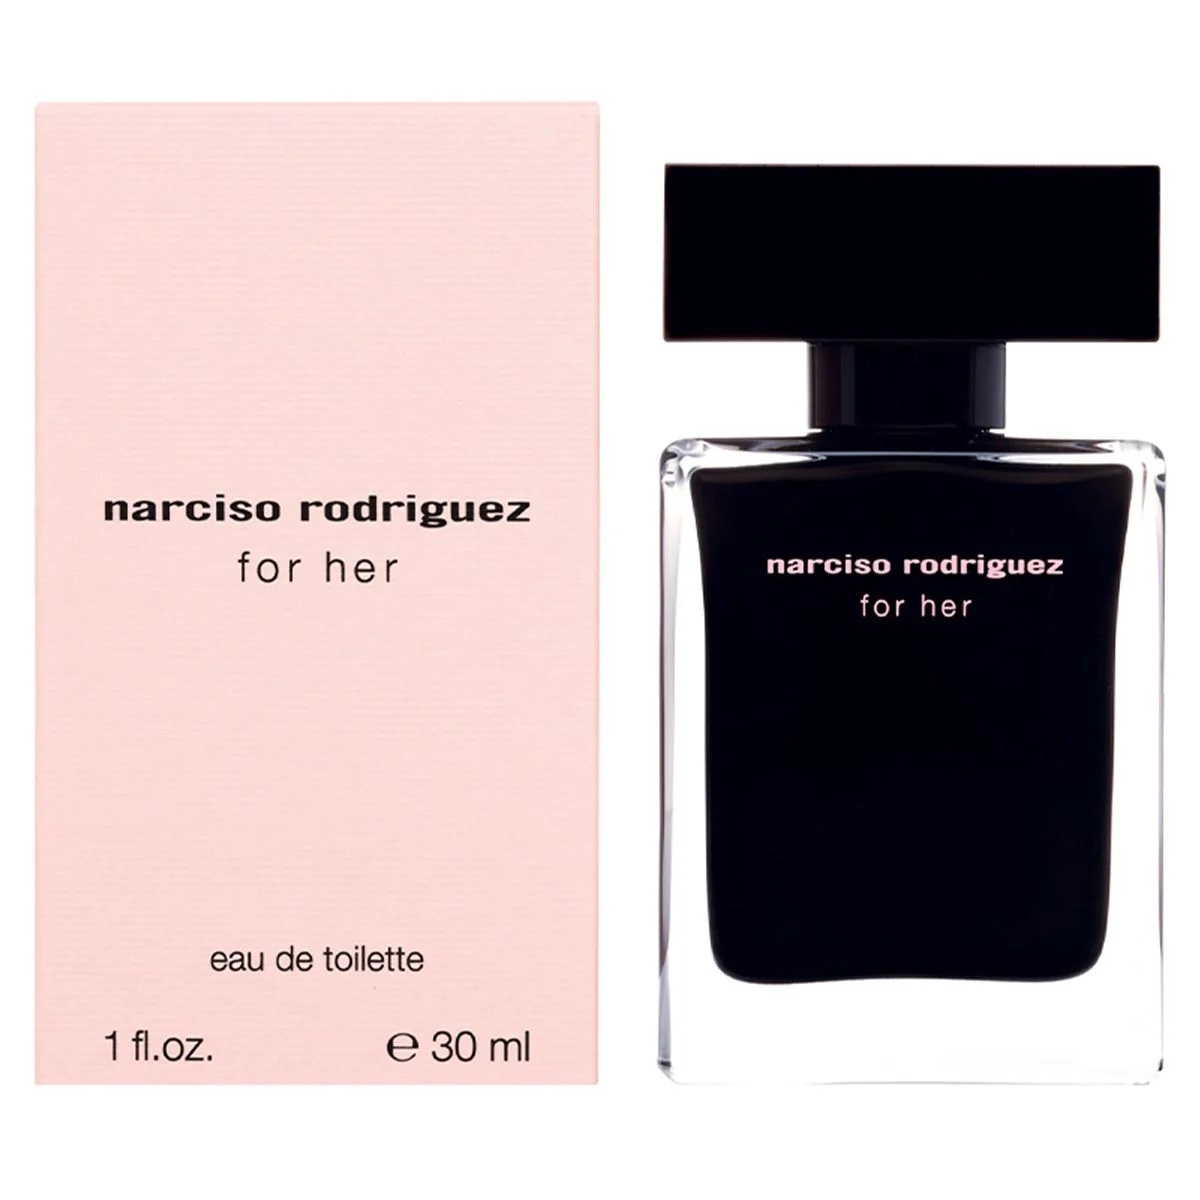 NƯỚC HOA NARCISO RODRIGUEZ FOR HER EDT 5